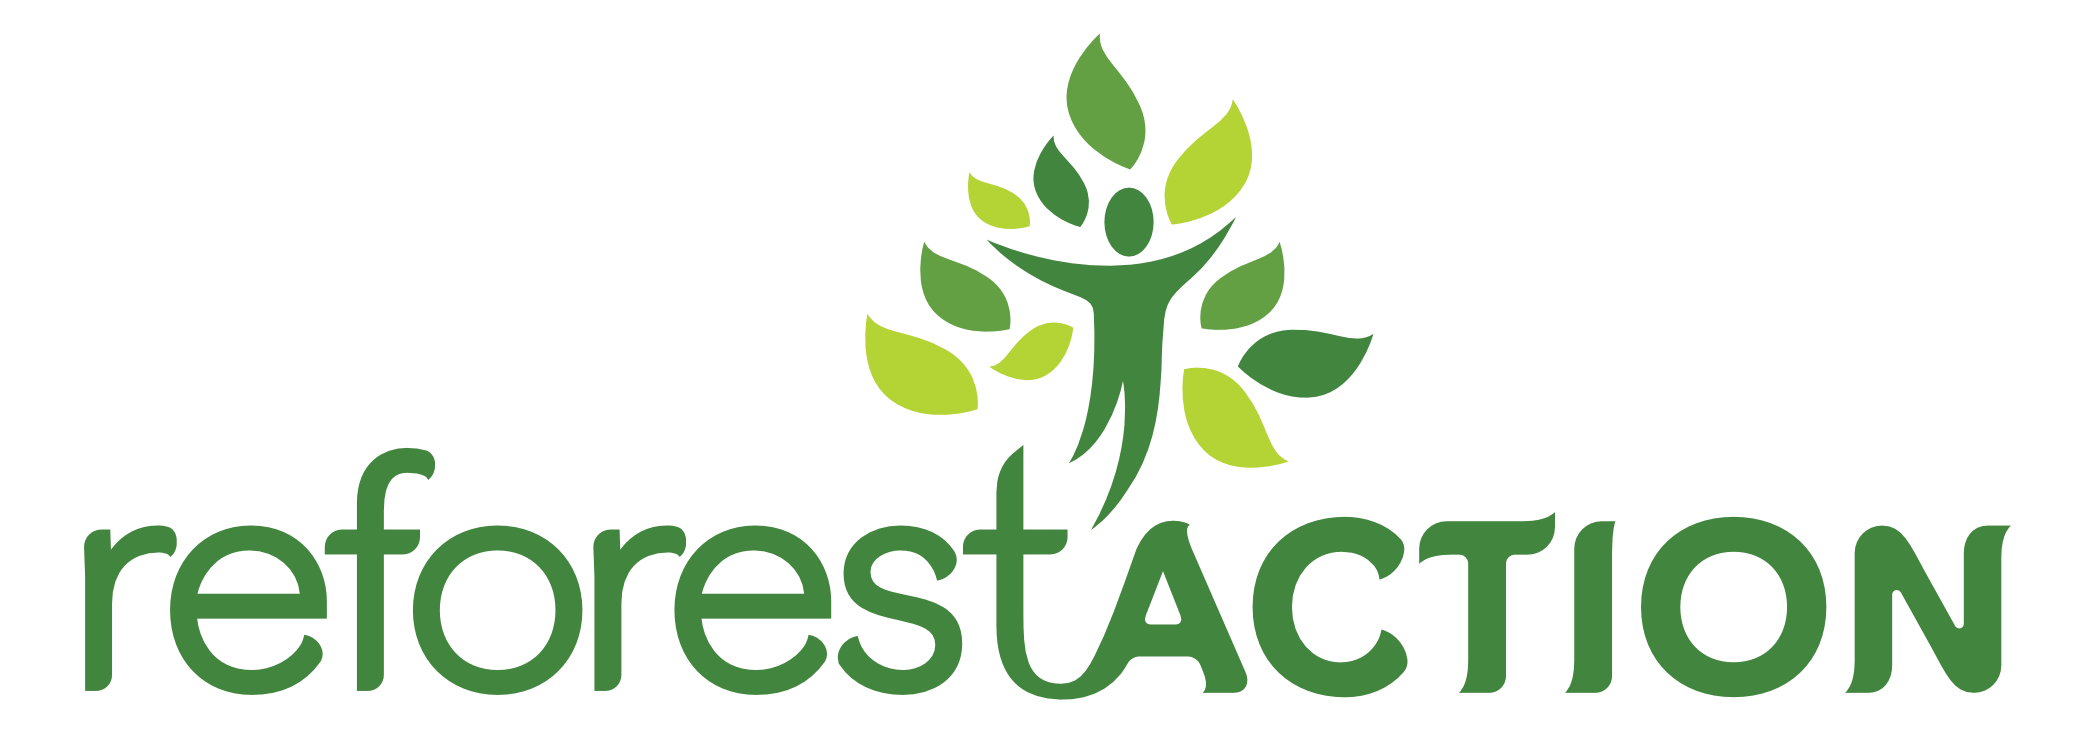 image of the reforestaction logo